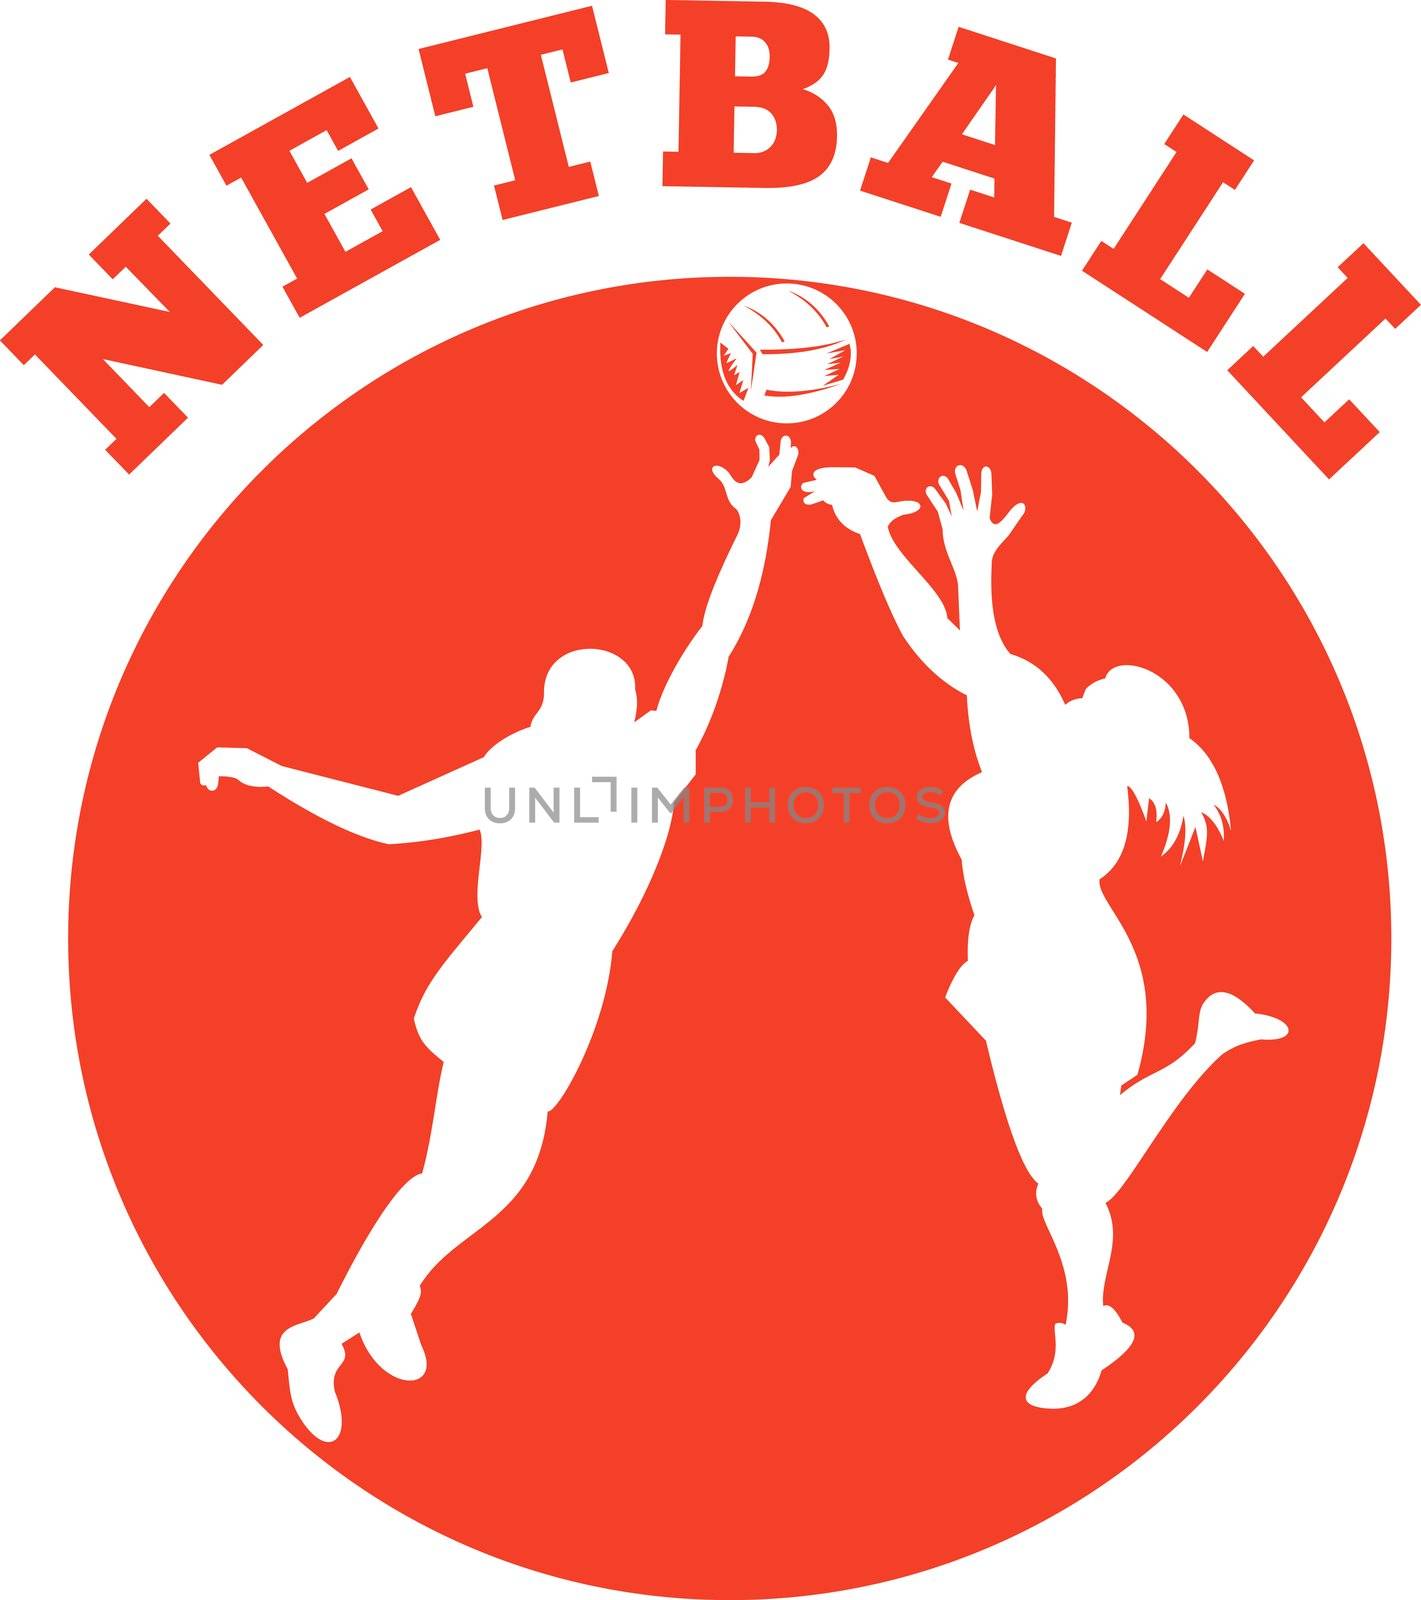 illustration of a netball player jumping and rebounding for ball set inside circle and words "netball"